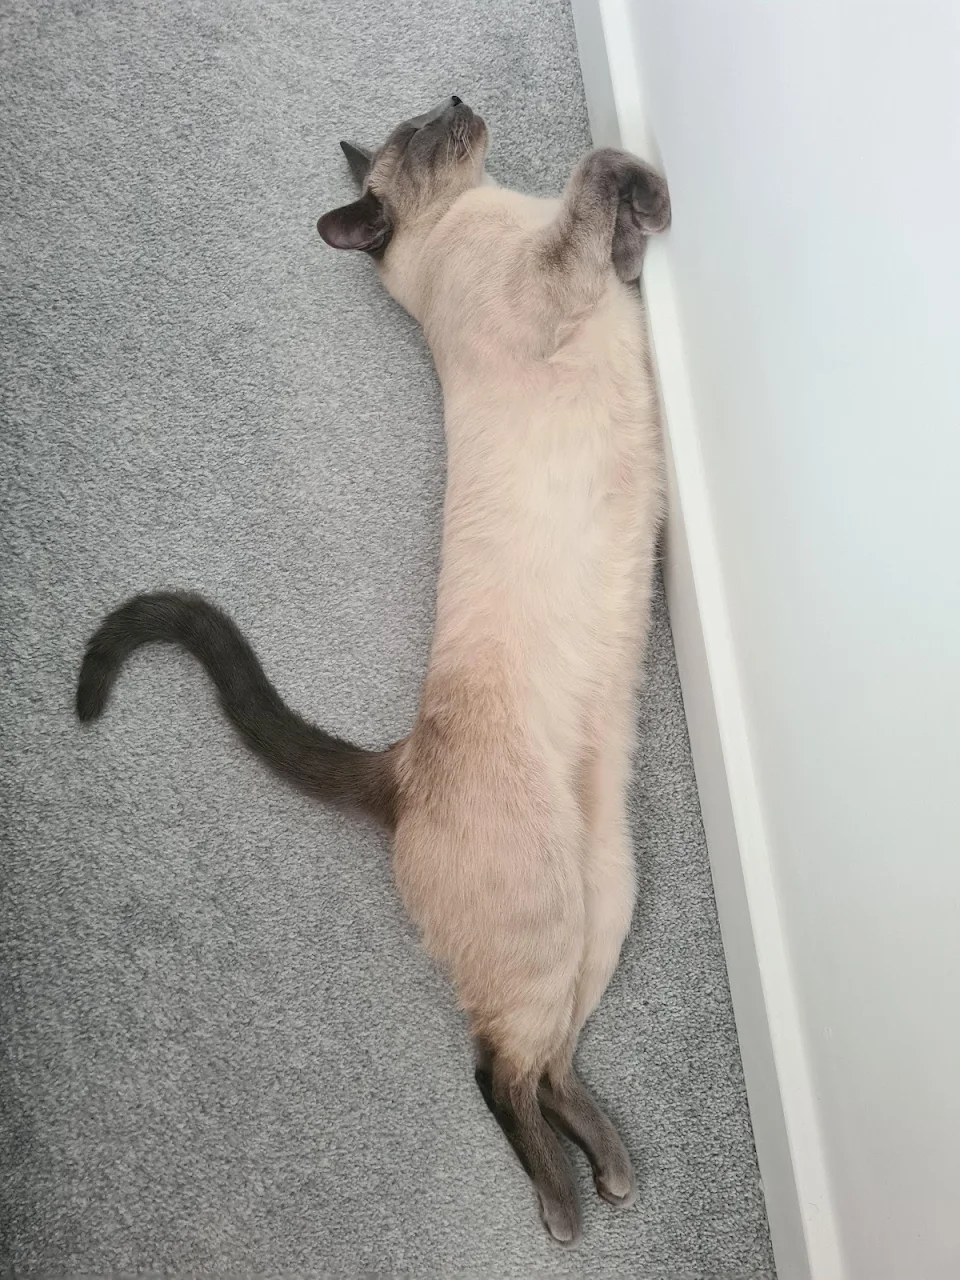 Stretched cat